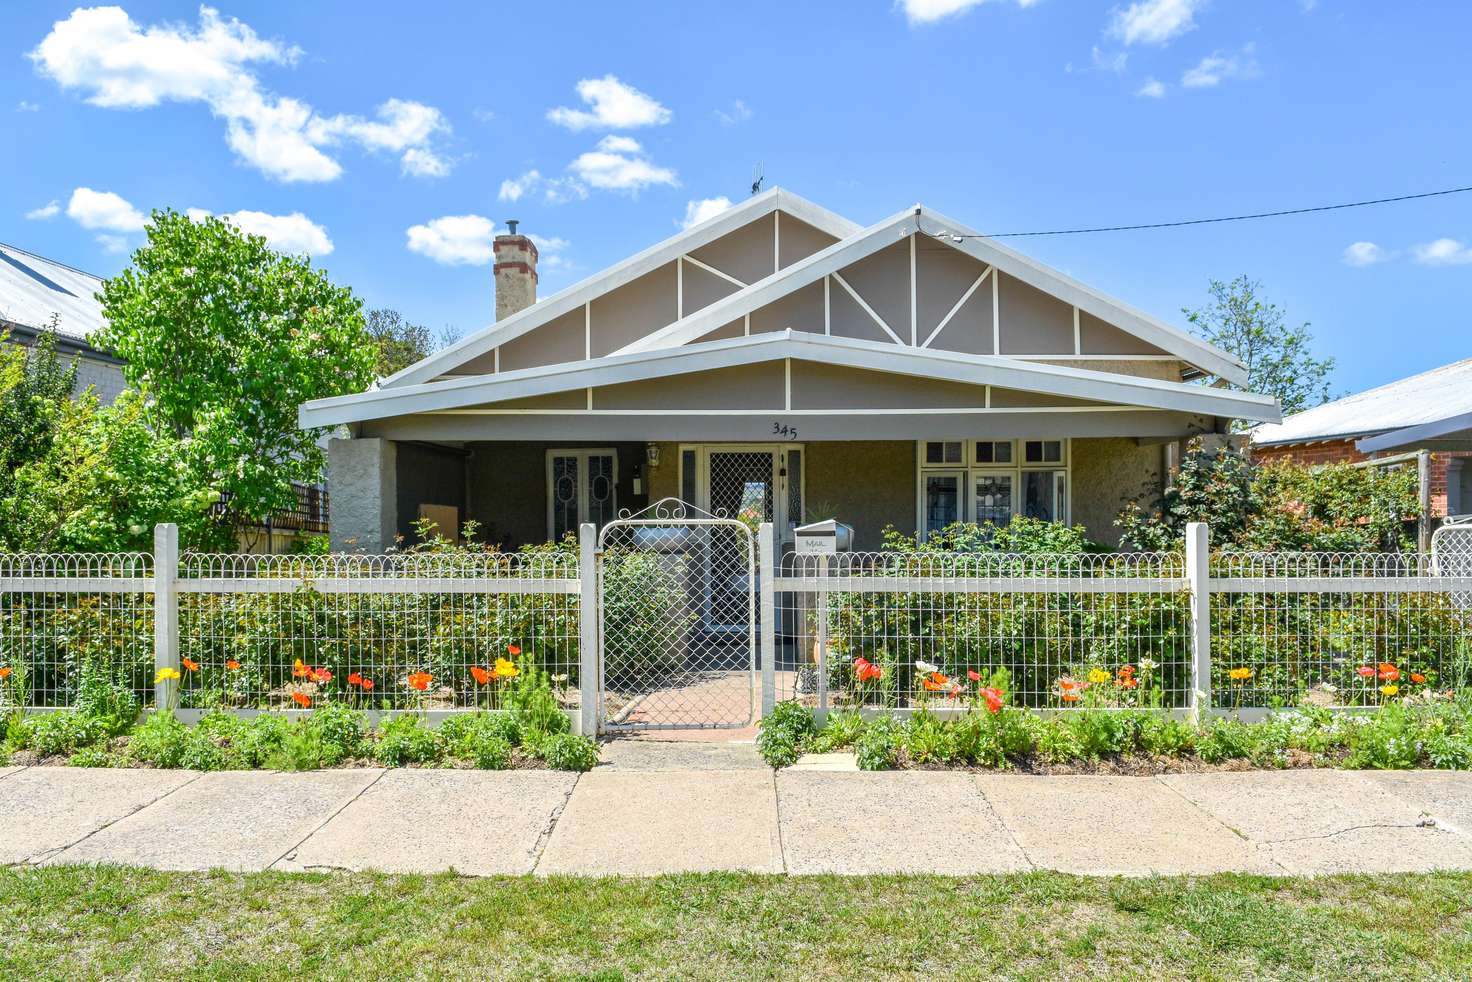 Main view of Homely house listing, 345 Howick Street, Bathurst NSW 2795